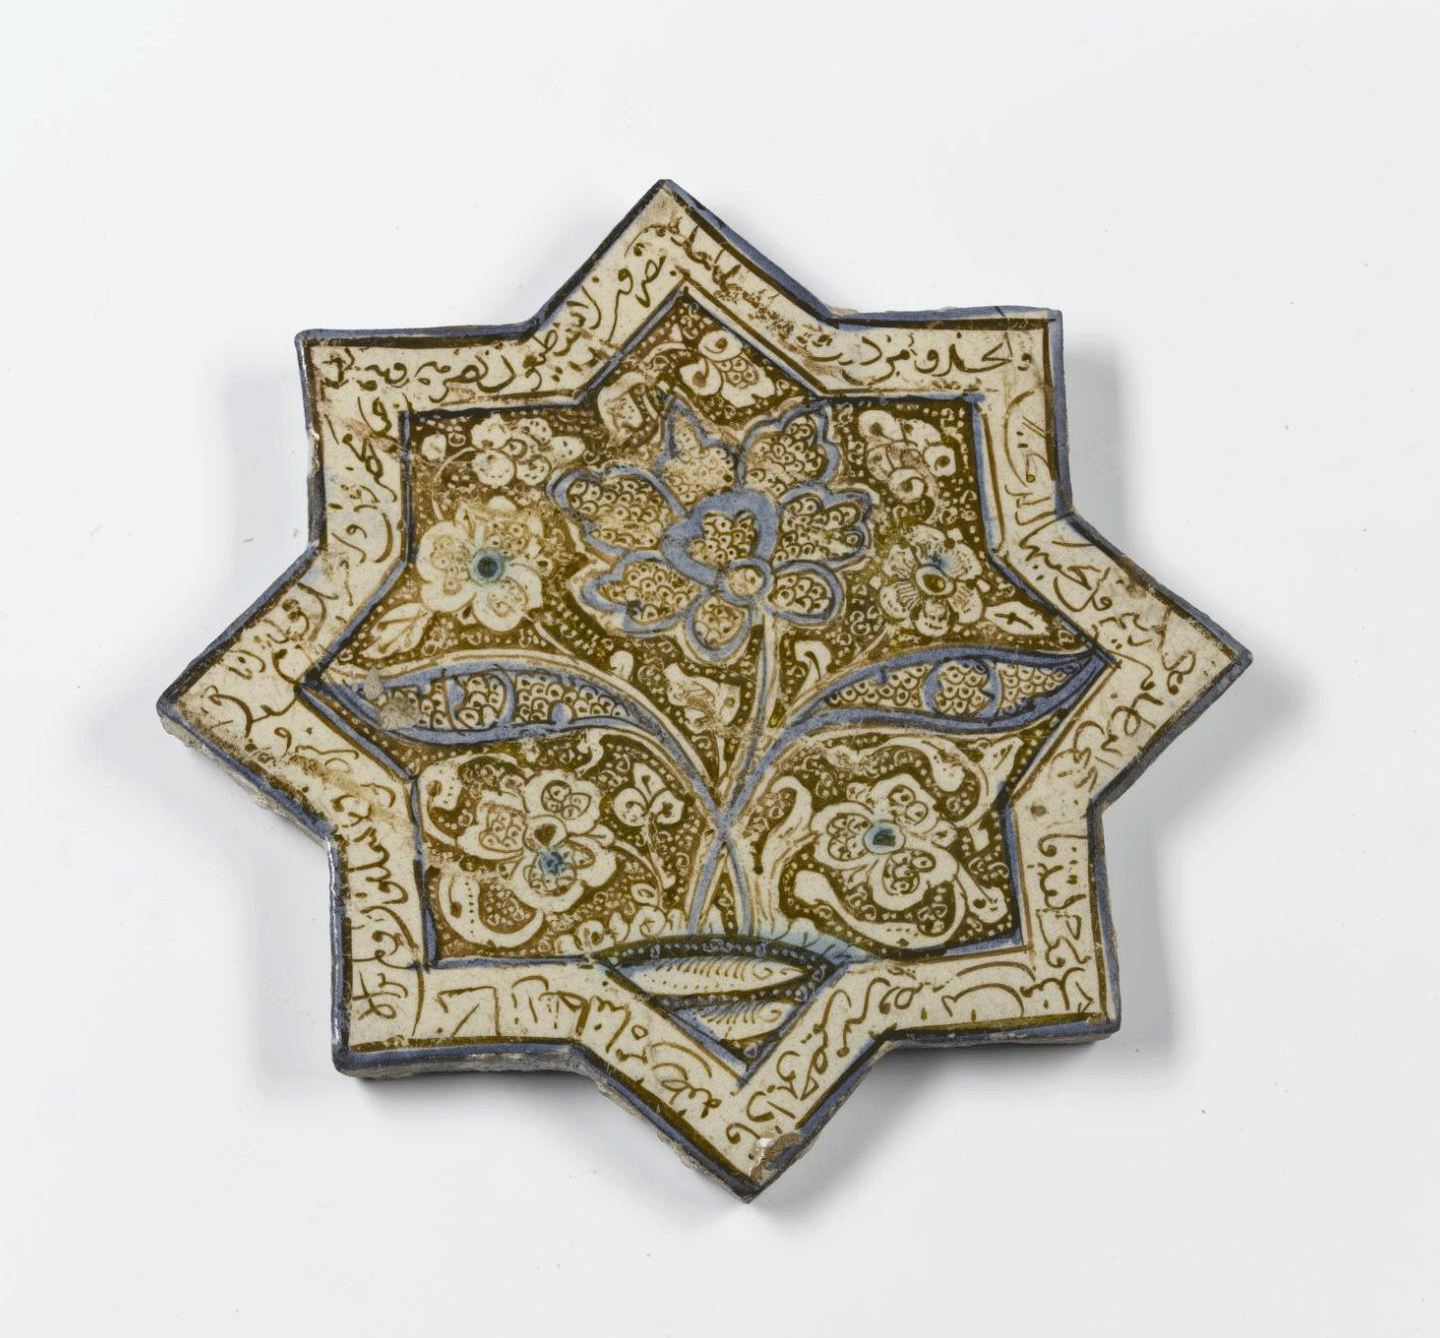 A 13th century lustre tile from Iran